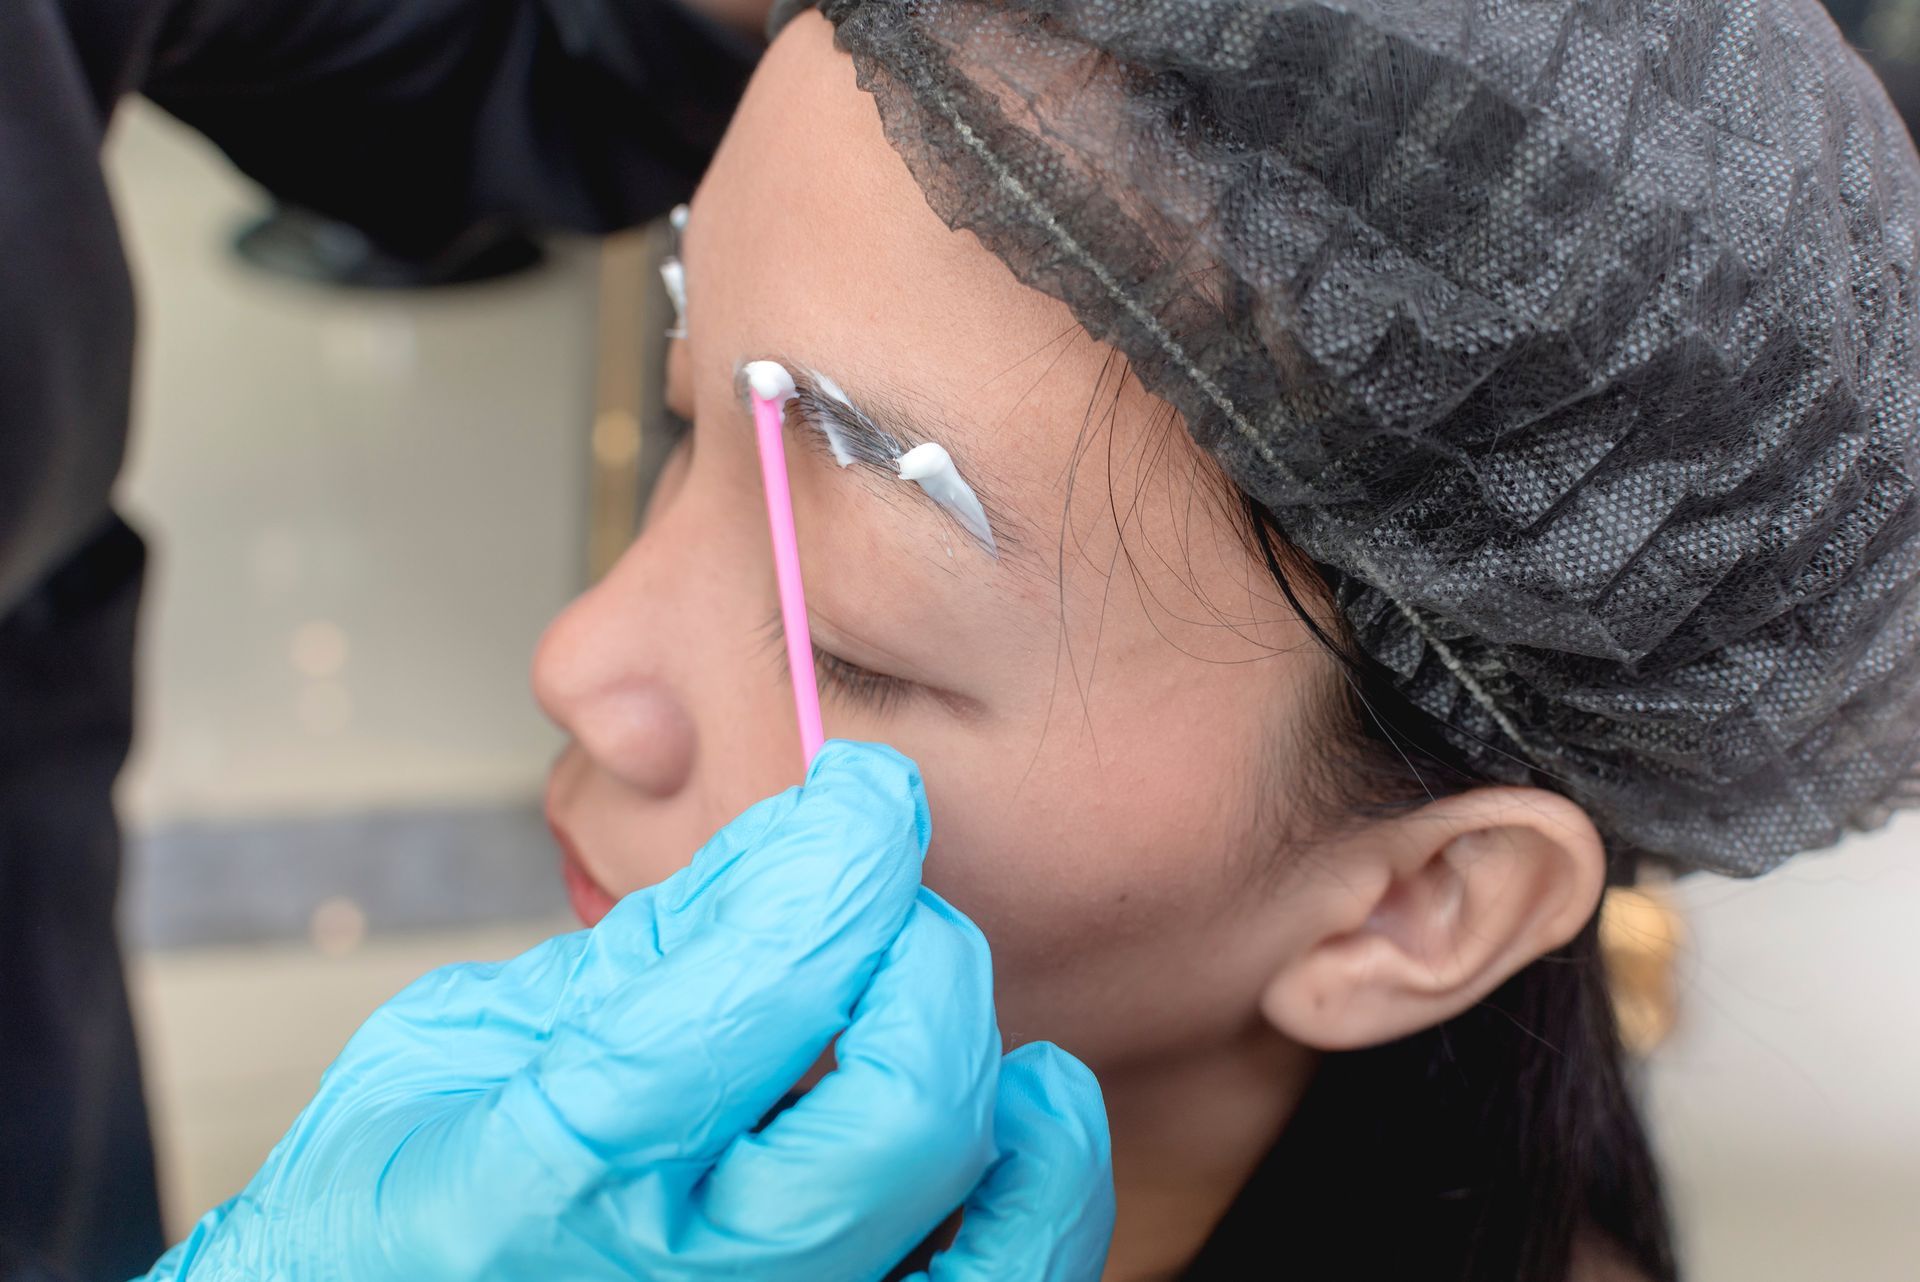 Microblading Artist Applying Numbing Cream to Eyebrows Before Microblading Procedure